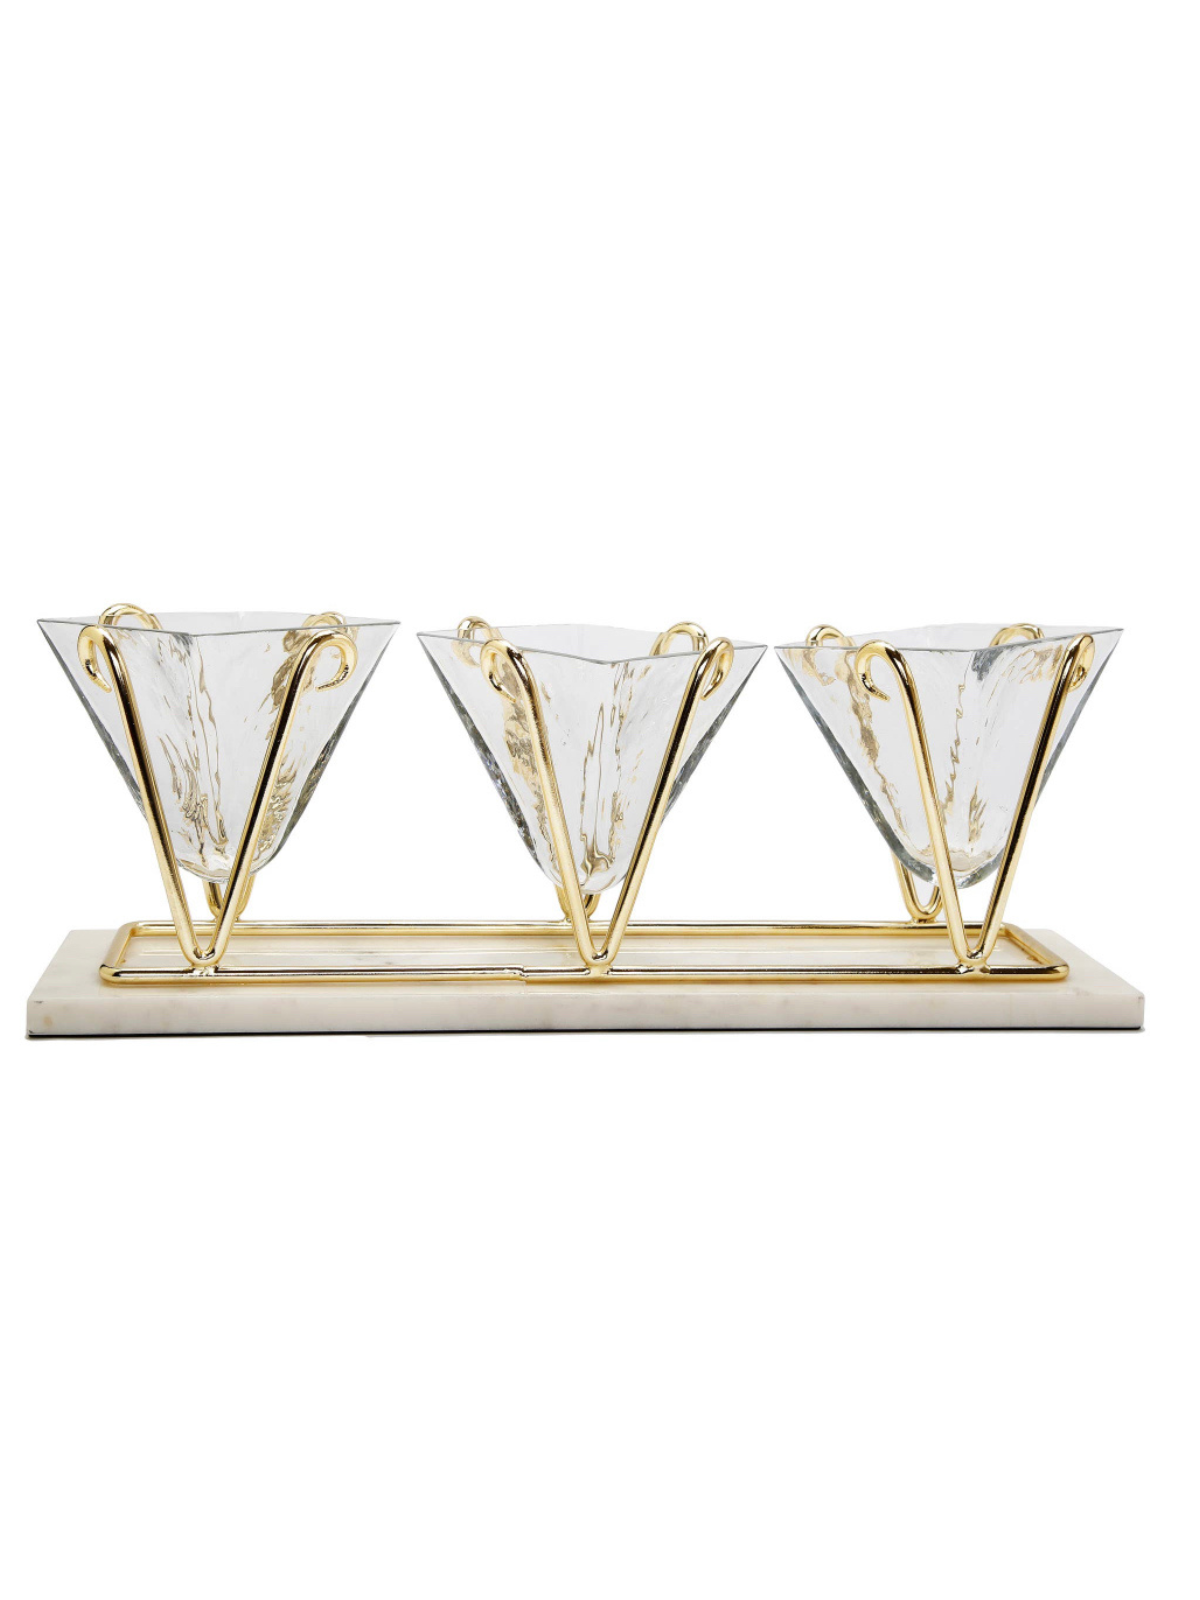 Marble Tray with 3 Glass Bowls and Gold Brass Holders Sold by KYA Home Decor.